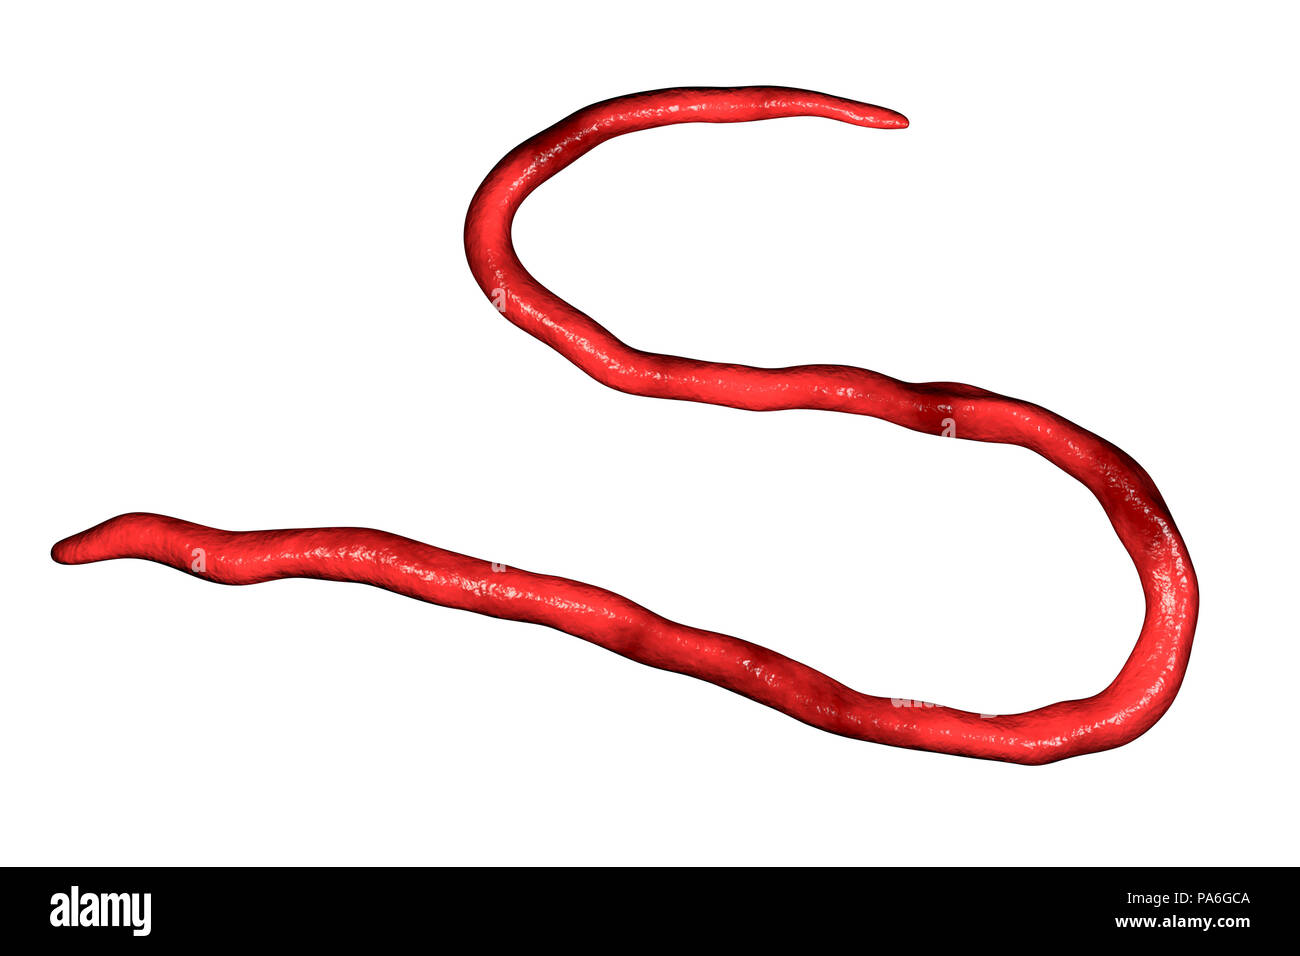 Onchocerca volvulus parasitic worm, computer illustration. O. volvulus is the causative agent of onchocerciasis or river blindness (Onchocerca worm infestation). An infestation begins when a host is bitten by a black fly (Simulium sp.) carrying the worm larvae. Illustration shows diagnostic morphological features of O. volvulus, there is no sheath and no nuclei in the tip of the tail. Stock Photo